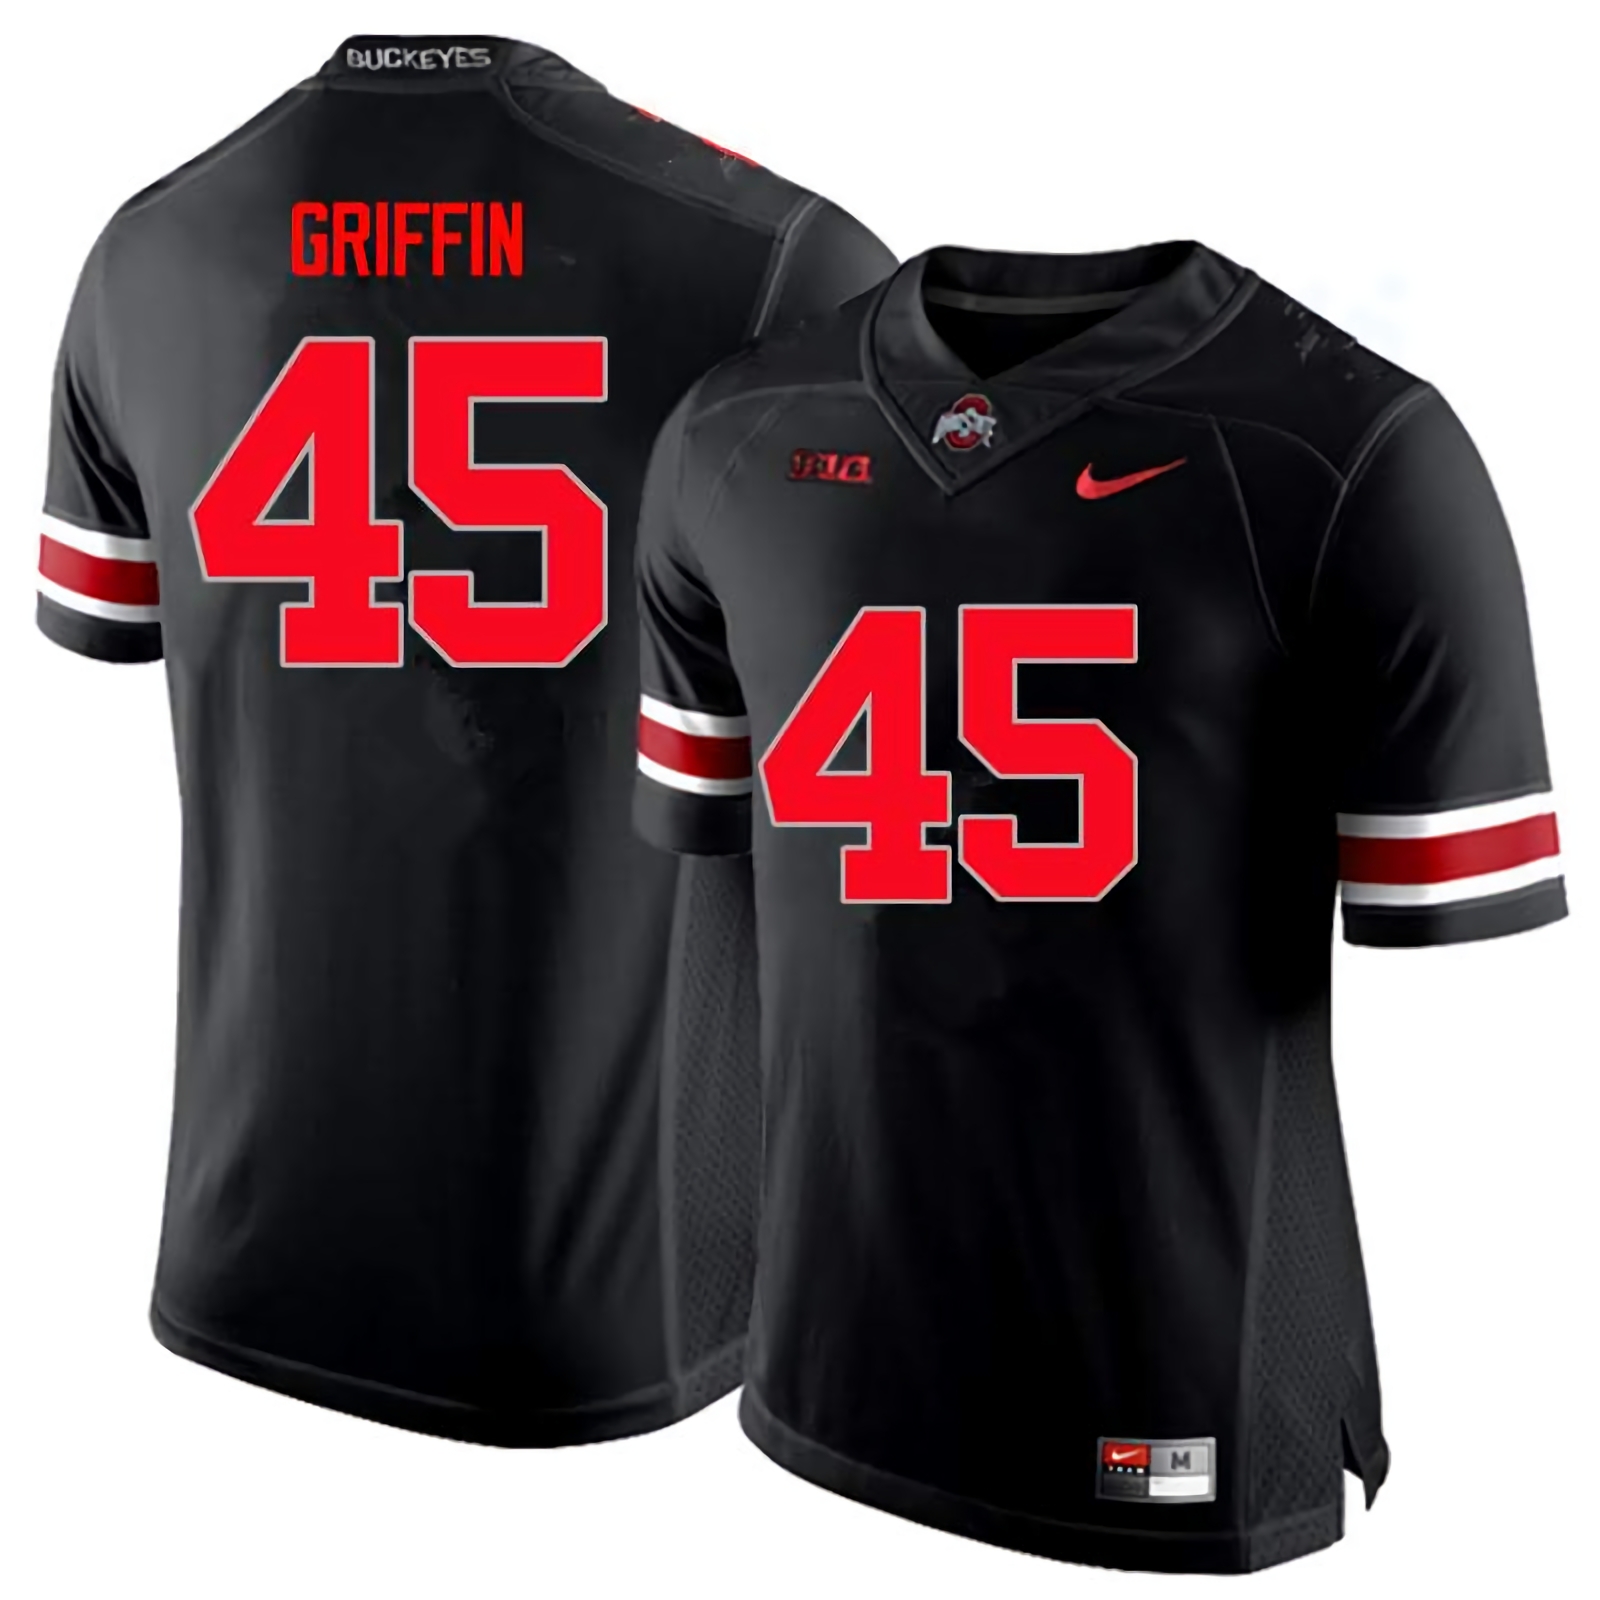 Archie Griffin Ohio State Buckeyes Men's NCAA #45 Nike Black Limited College Stitched Football Jersey MYS5556ZB